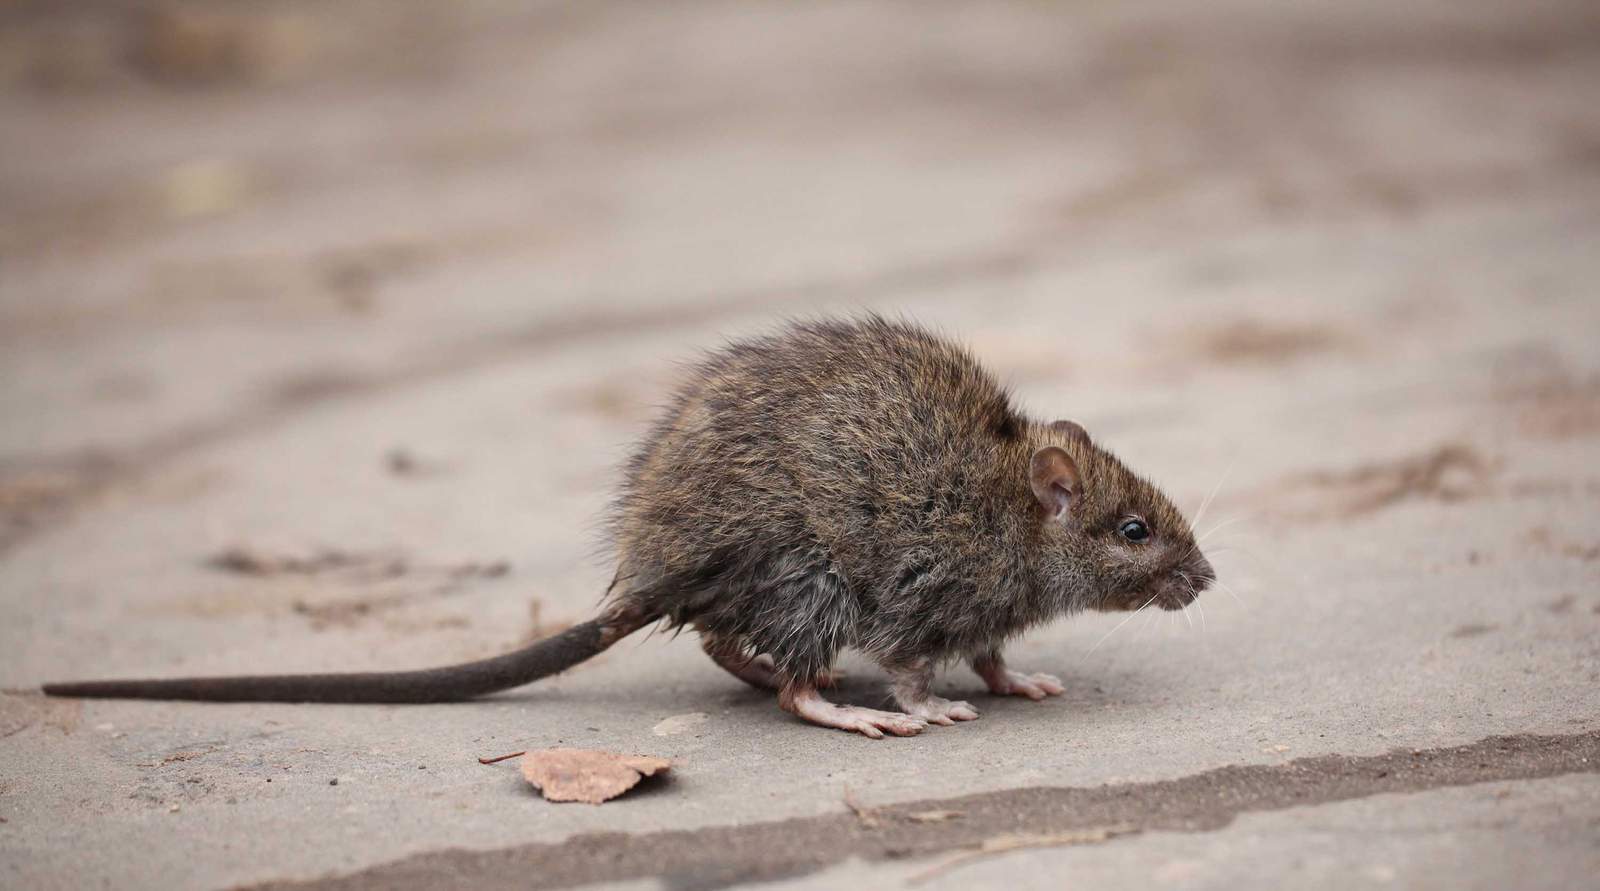 CDC warns of unusual or aggressive rodents hunting for food amid COVID-19